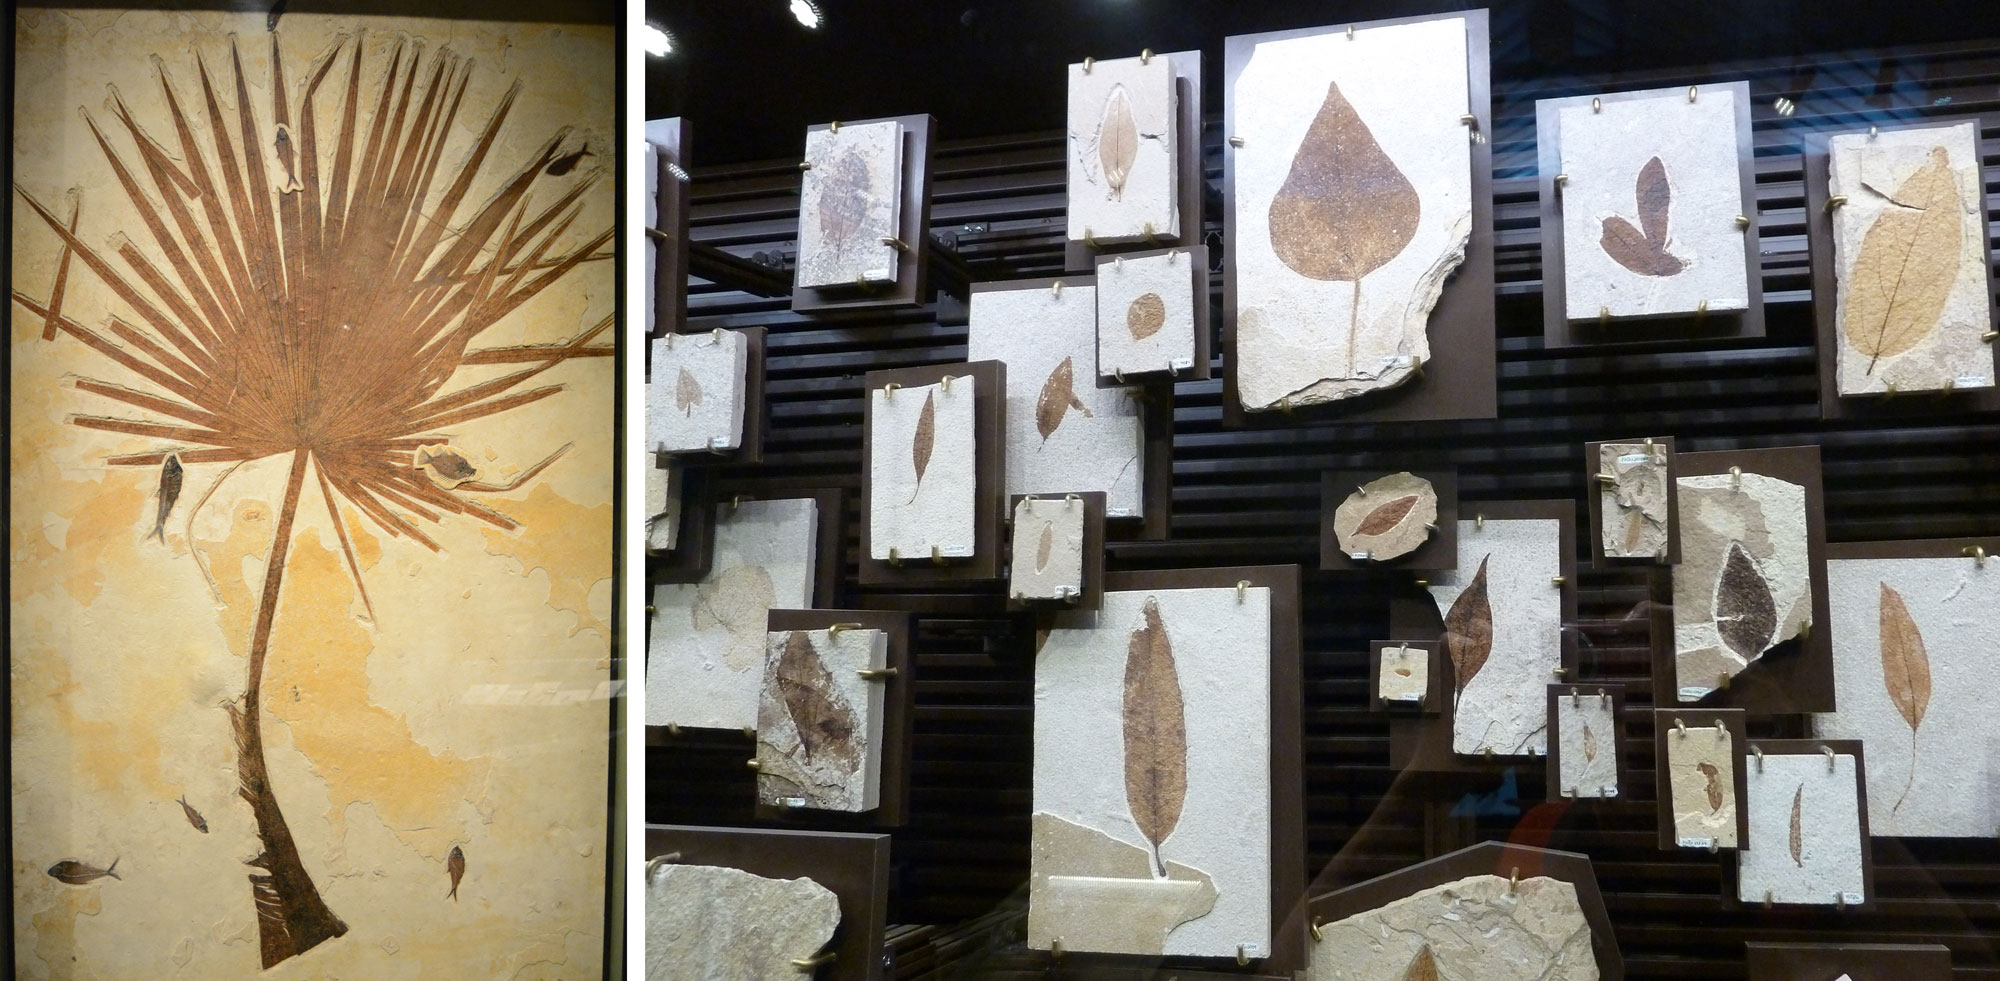 2-panel image of photographs of fossil plants from Fossil Lake, Wyoming. Panel 1: Photo of a single fossil palm leaf on display at a museum. The photo shows a single palmate leaf with a long stalk. Seven or eight fish are preserved on the slab with the leaf. Panel 2: Photograph of plant fossils on display at Fossil Butte National Monument visitor center, Wyoming. The photo shows leaf fossils preserved on rectangles of off-white rock mounted vertically on a display wall. 